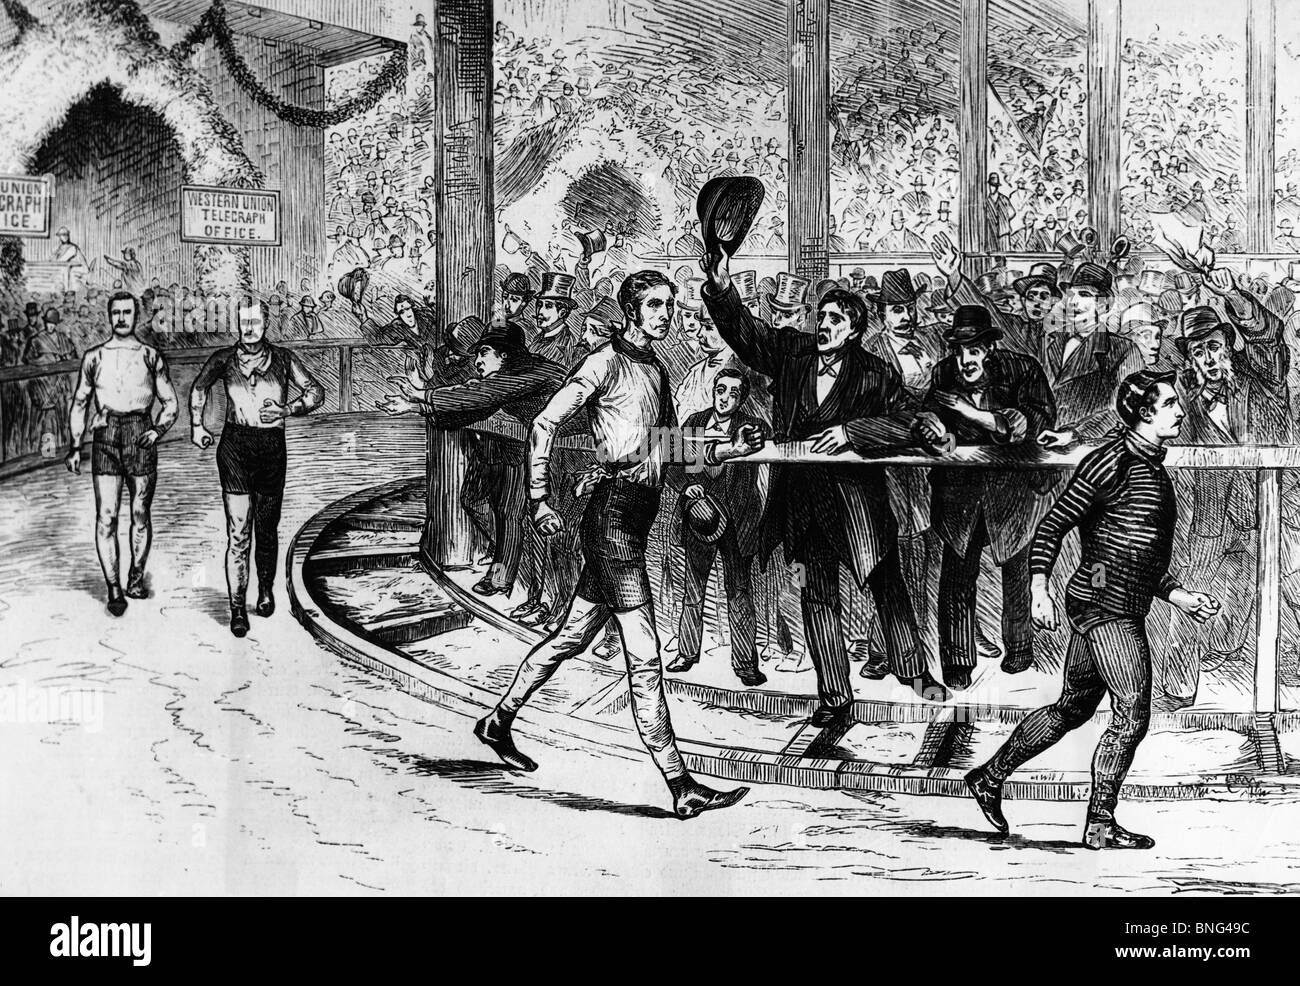 International Six-Day Walking Match in New York City, March 1879 by unknown artist Stock Photo